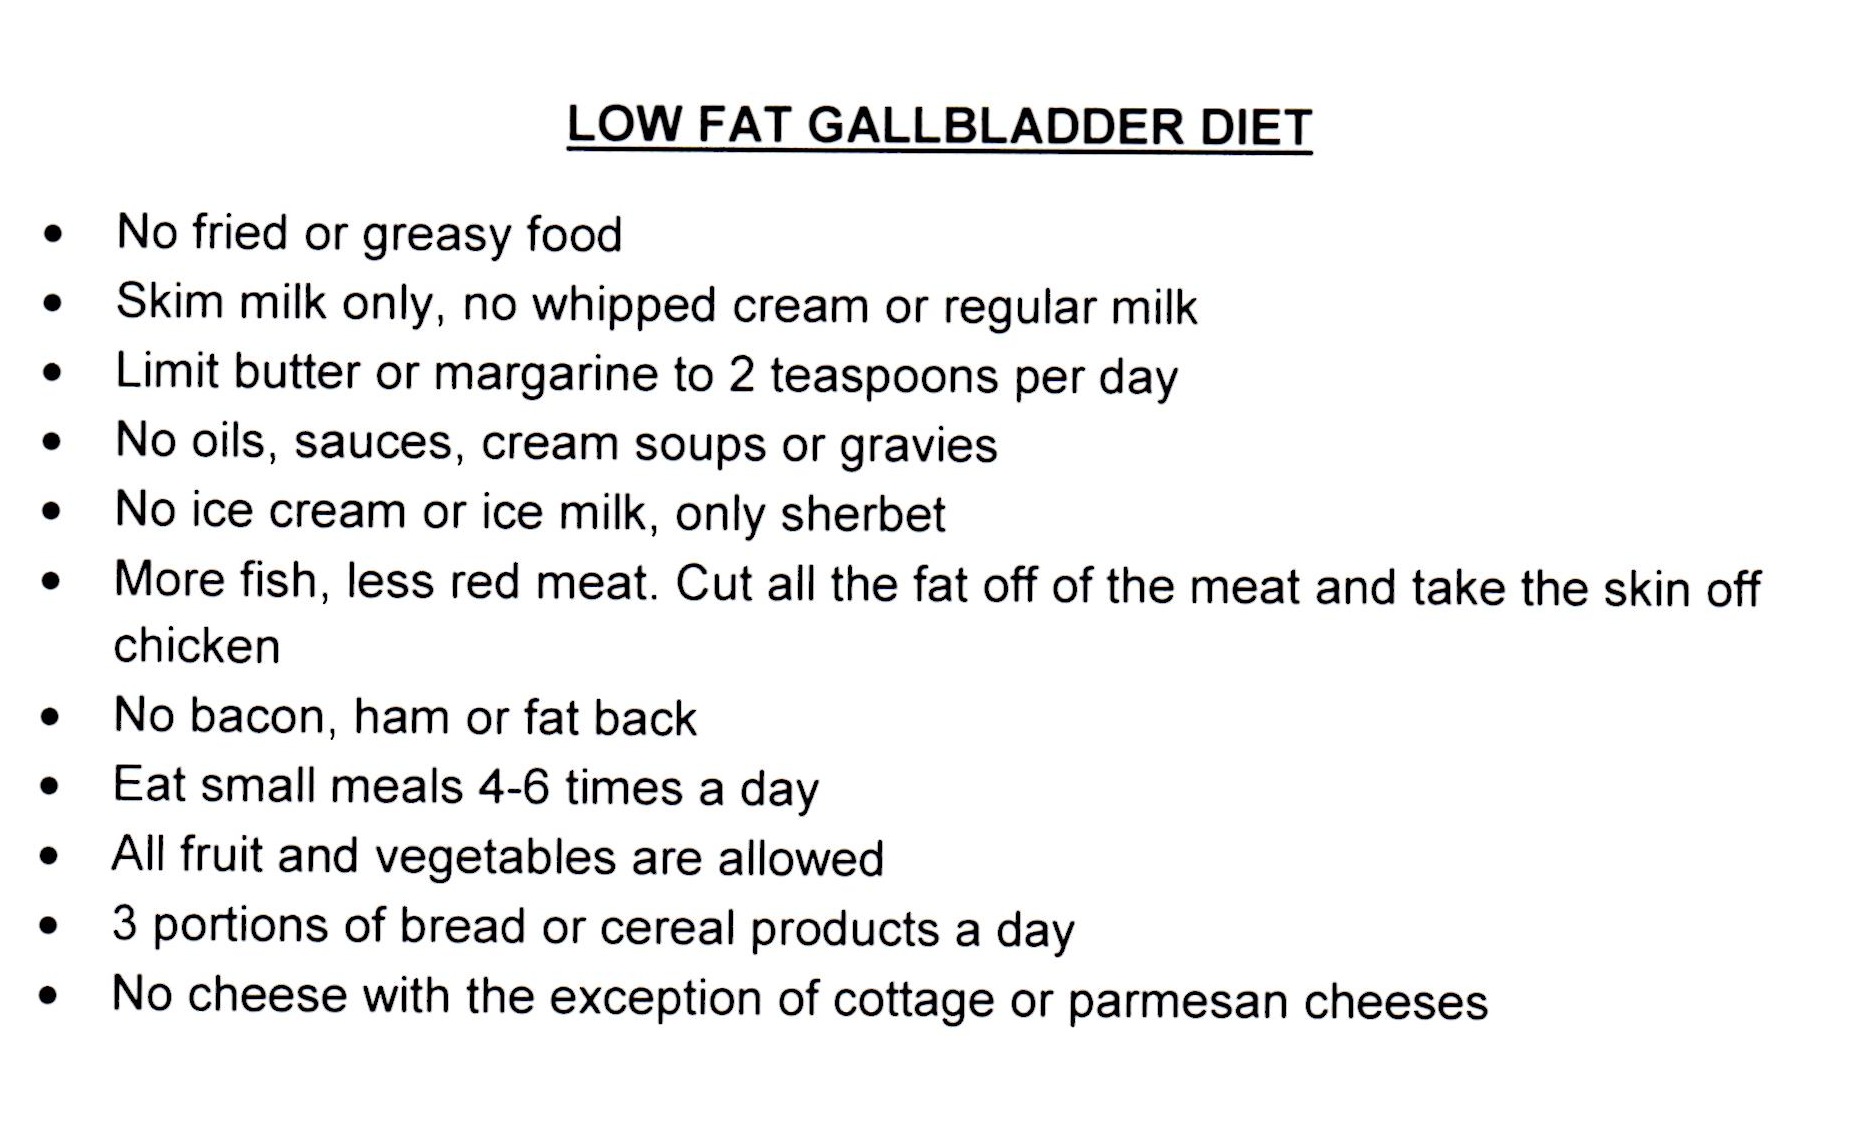 Comments about gallbladder diet foods :